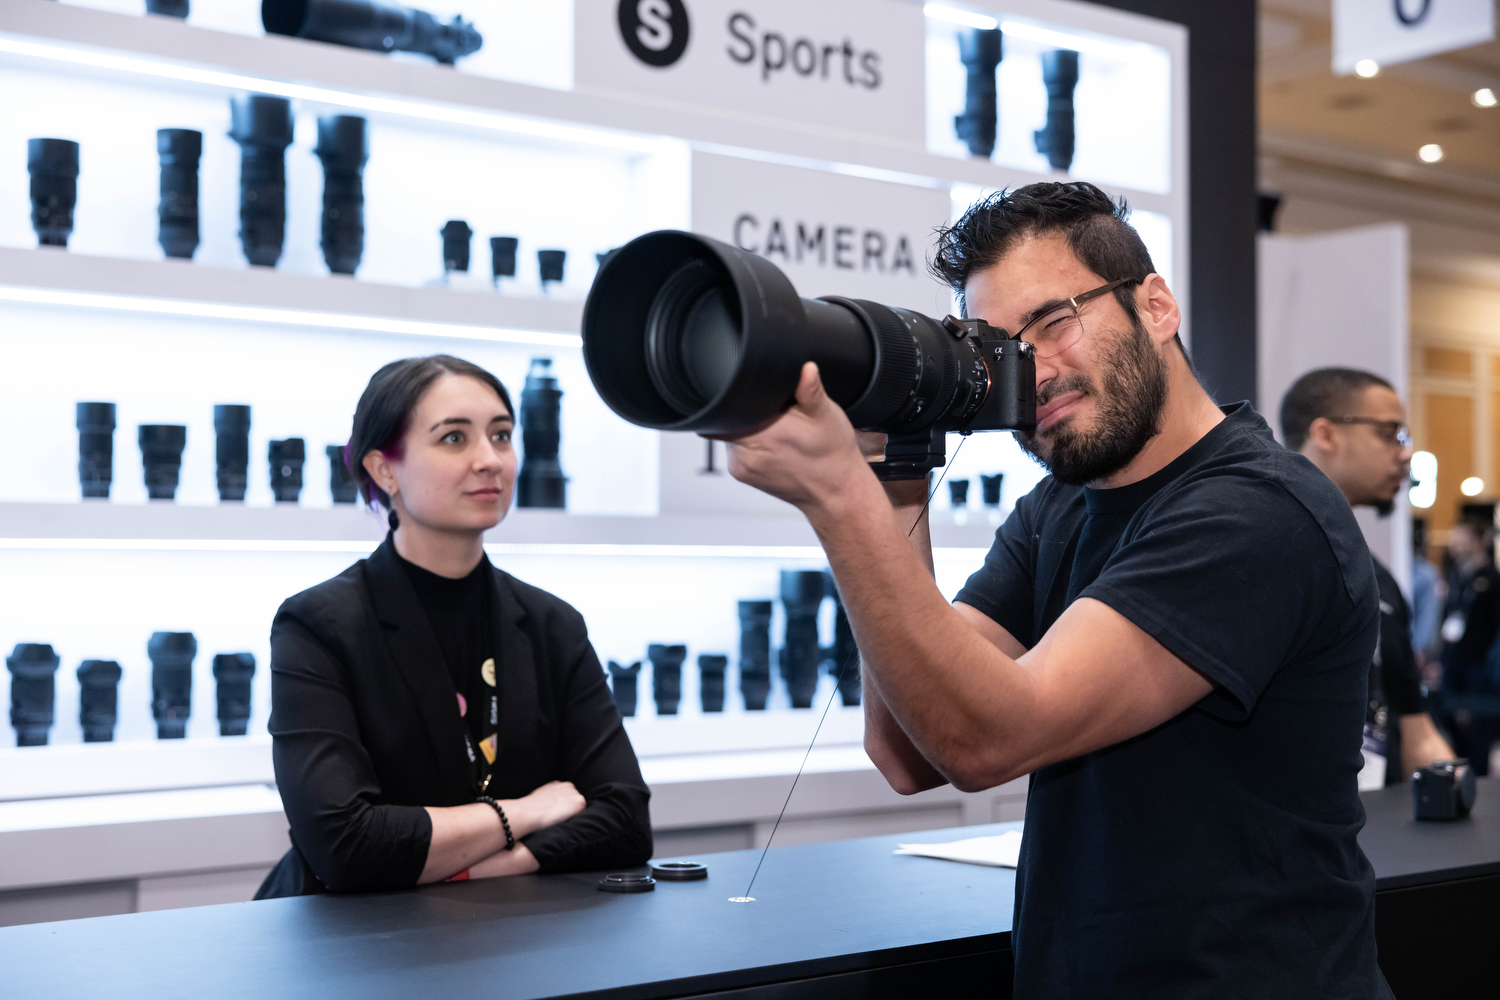 WPPI included more than 30,000 square feet of exhibit space of the latest camera technology and photographic accessories.